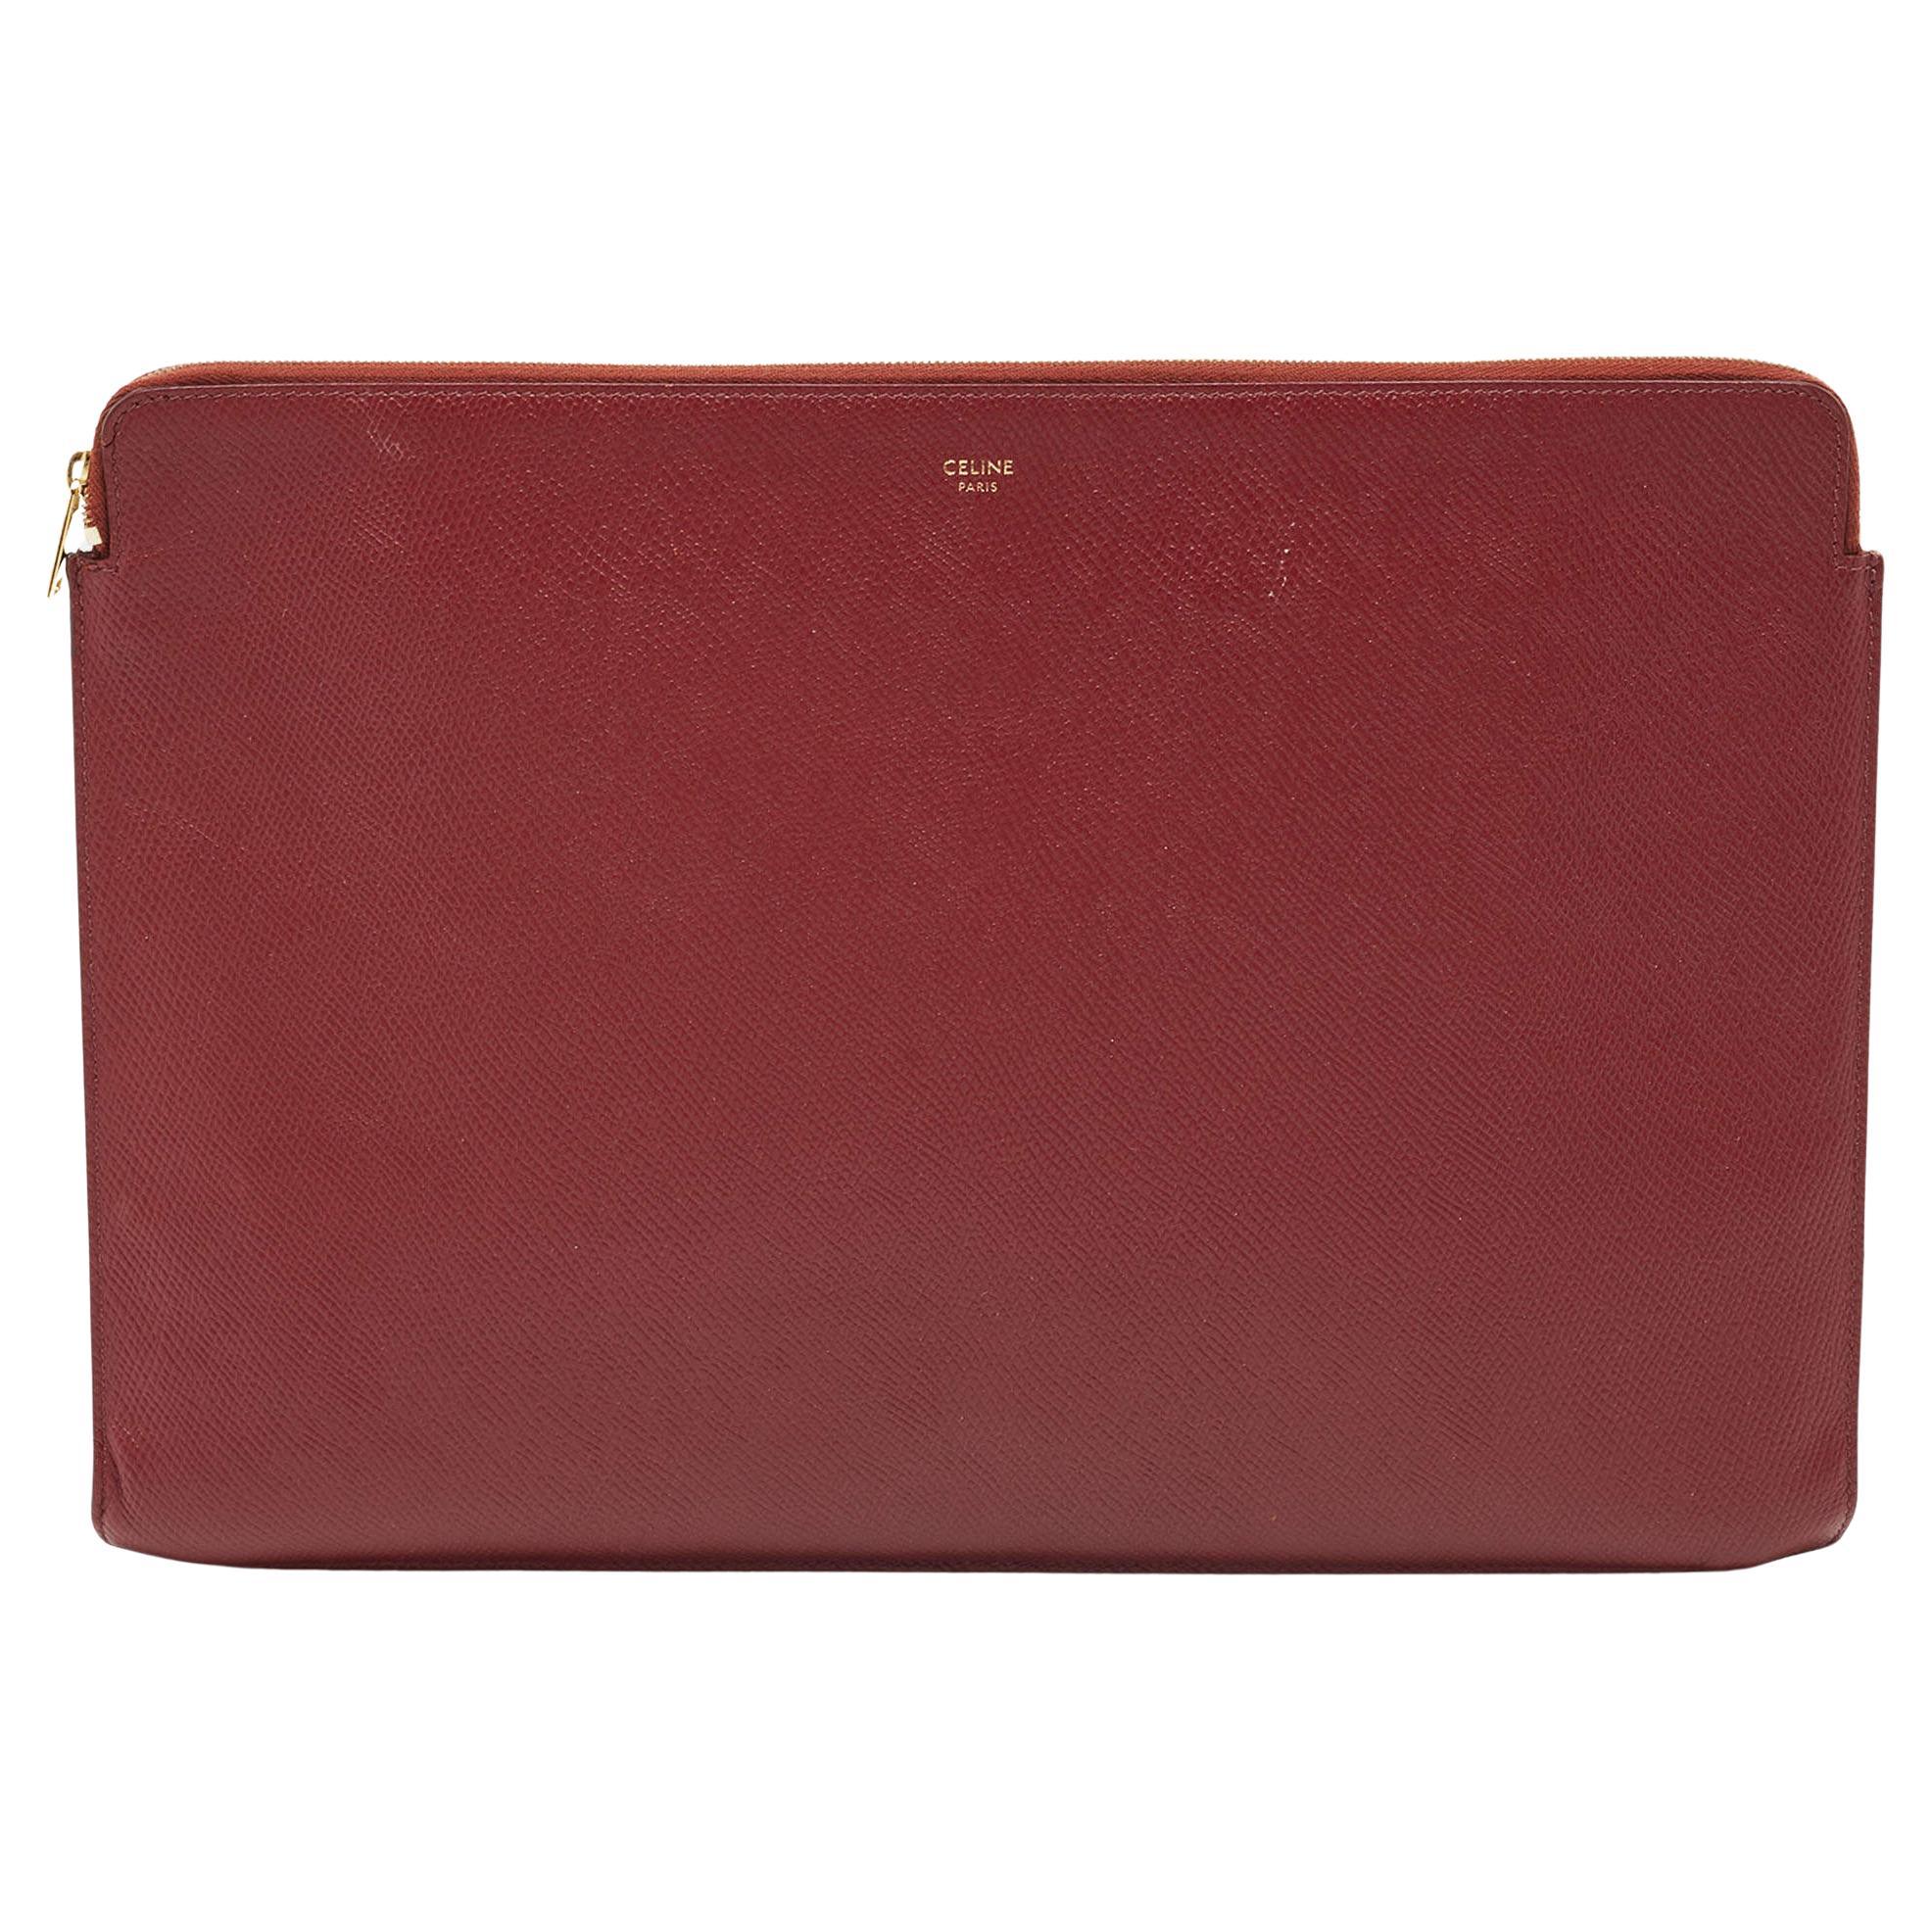 Celine Red Leather Zip Pouch